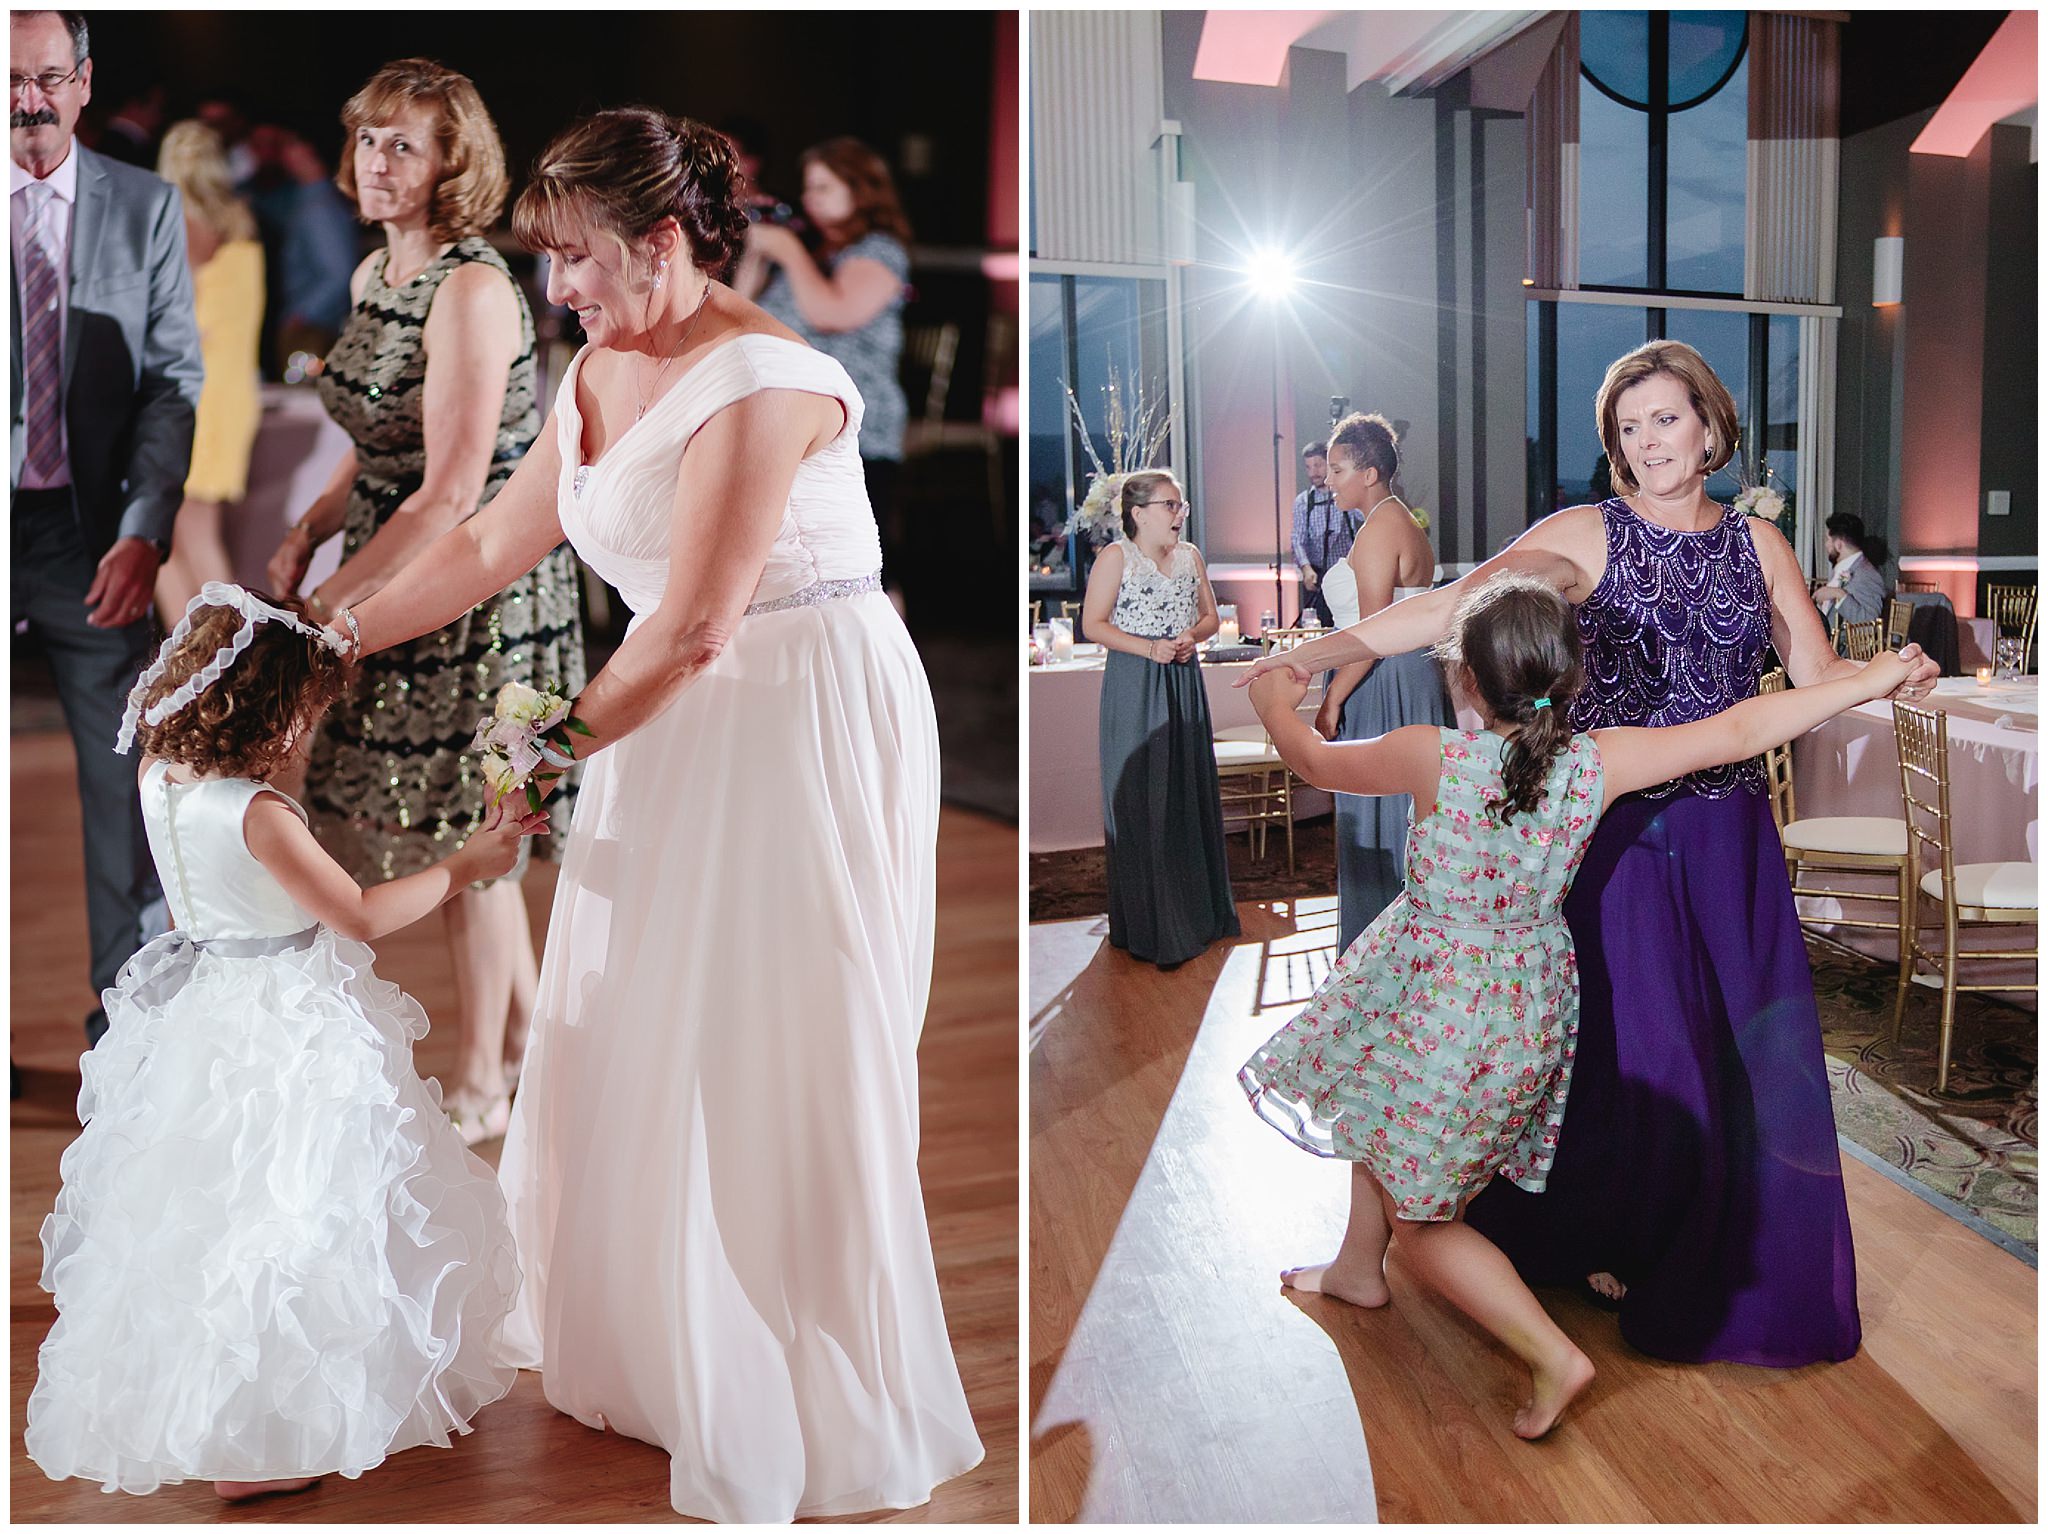 Mothers of the bride and groom dance with children at Chestnut Ridge Golf Resort